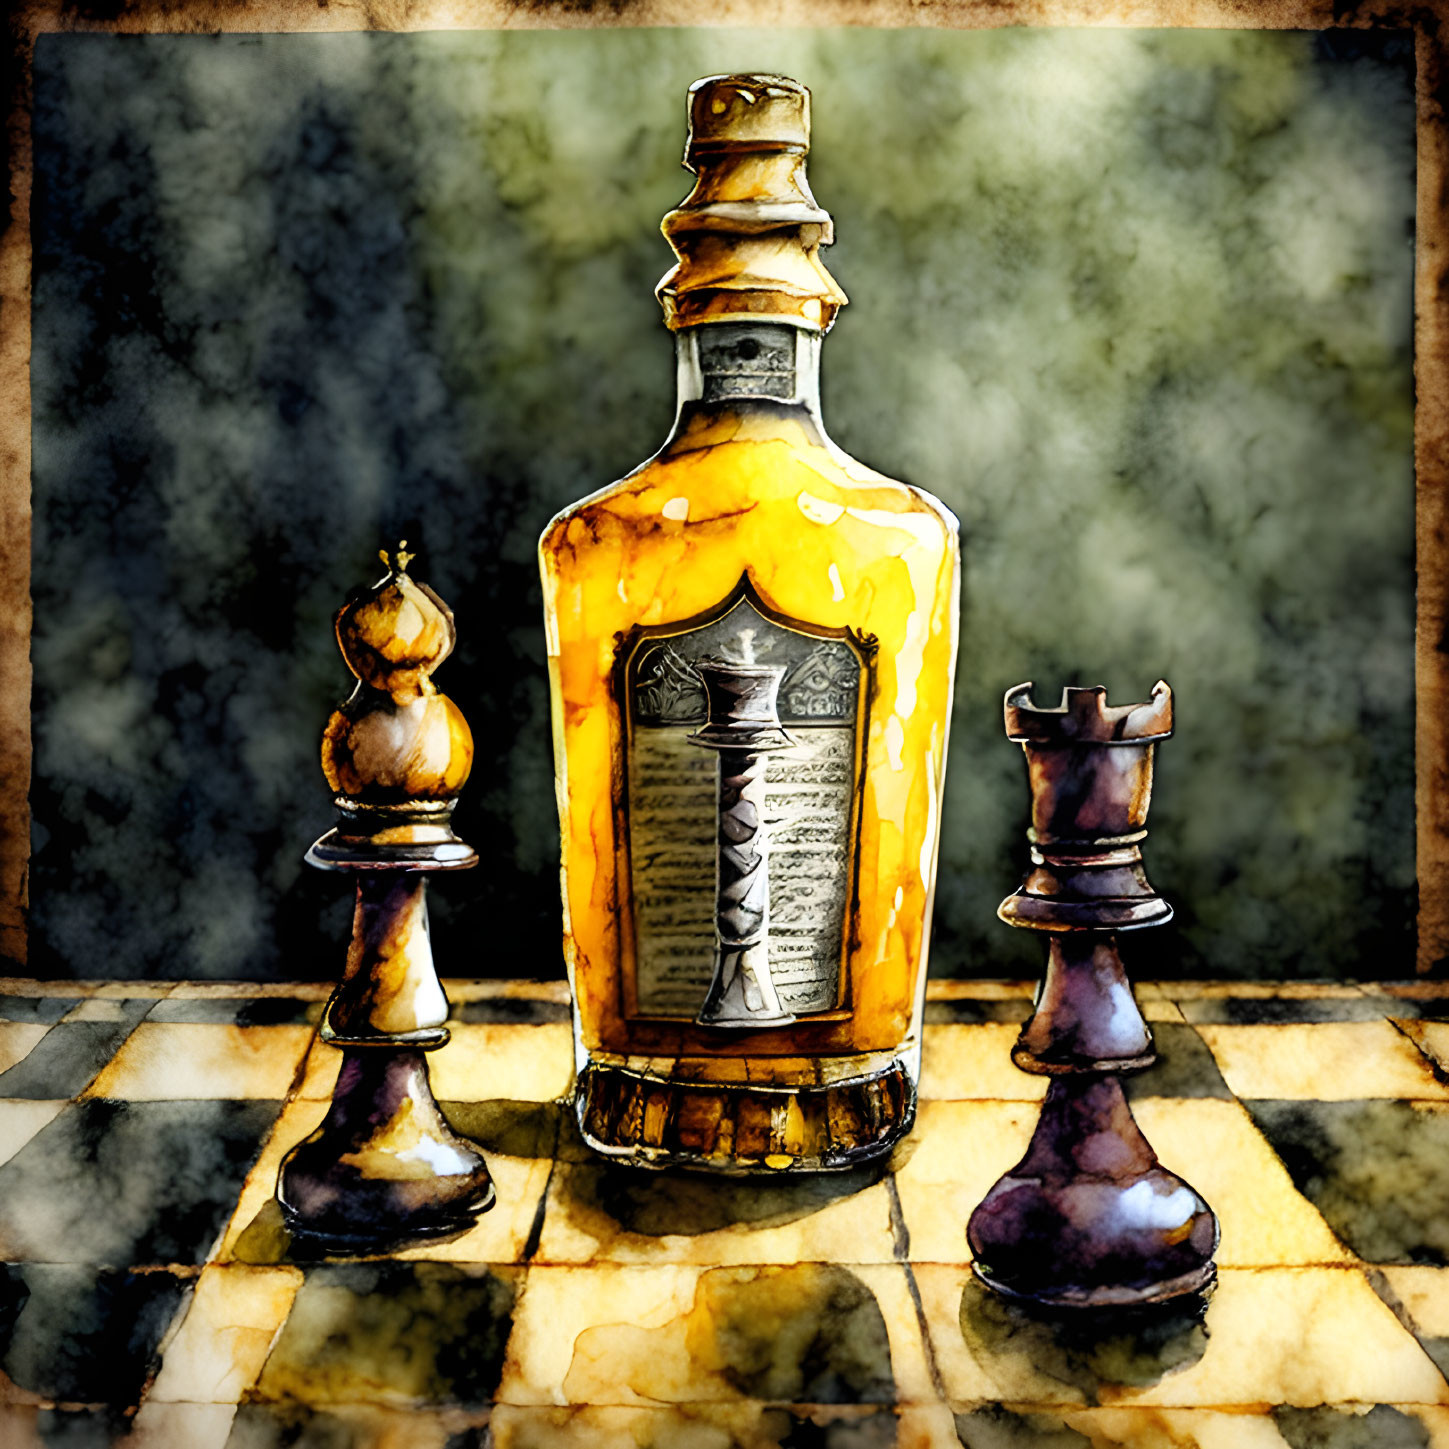 The Scotch Game - A How to Play Guide (for White and Black) - Chessable Blog